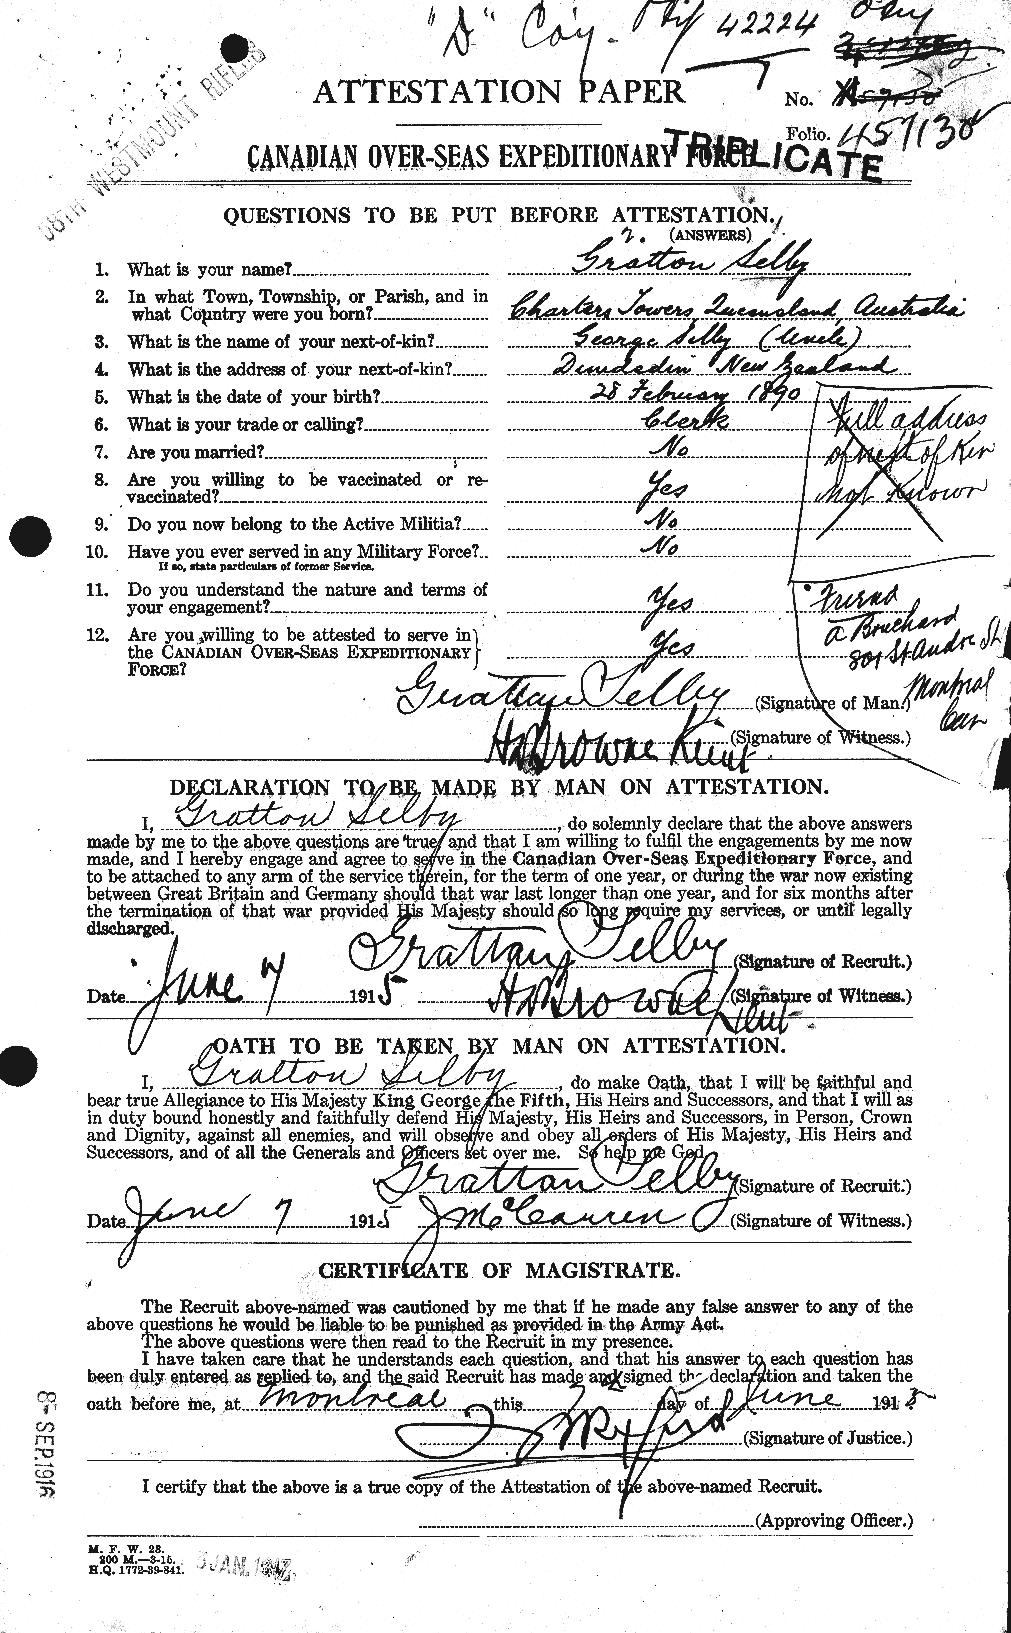 Personnel Records of the First World War - CEF 088755a